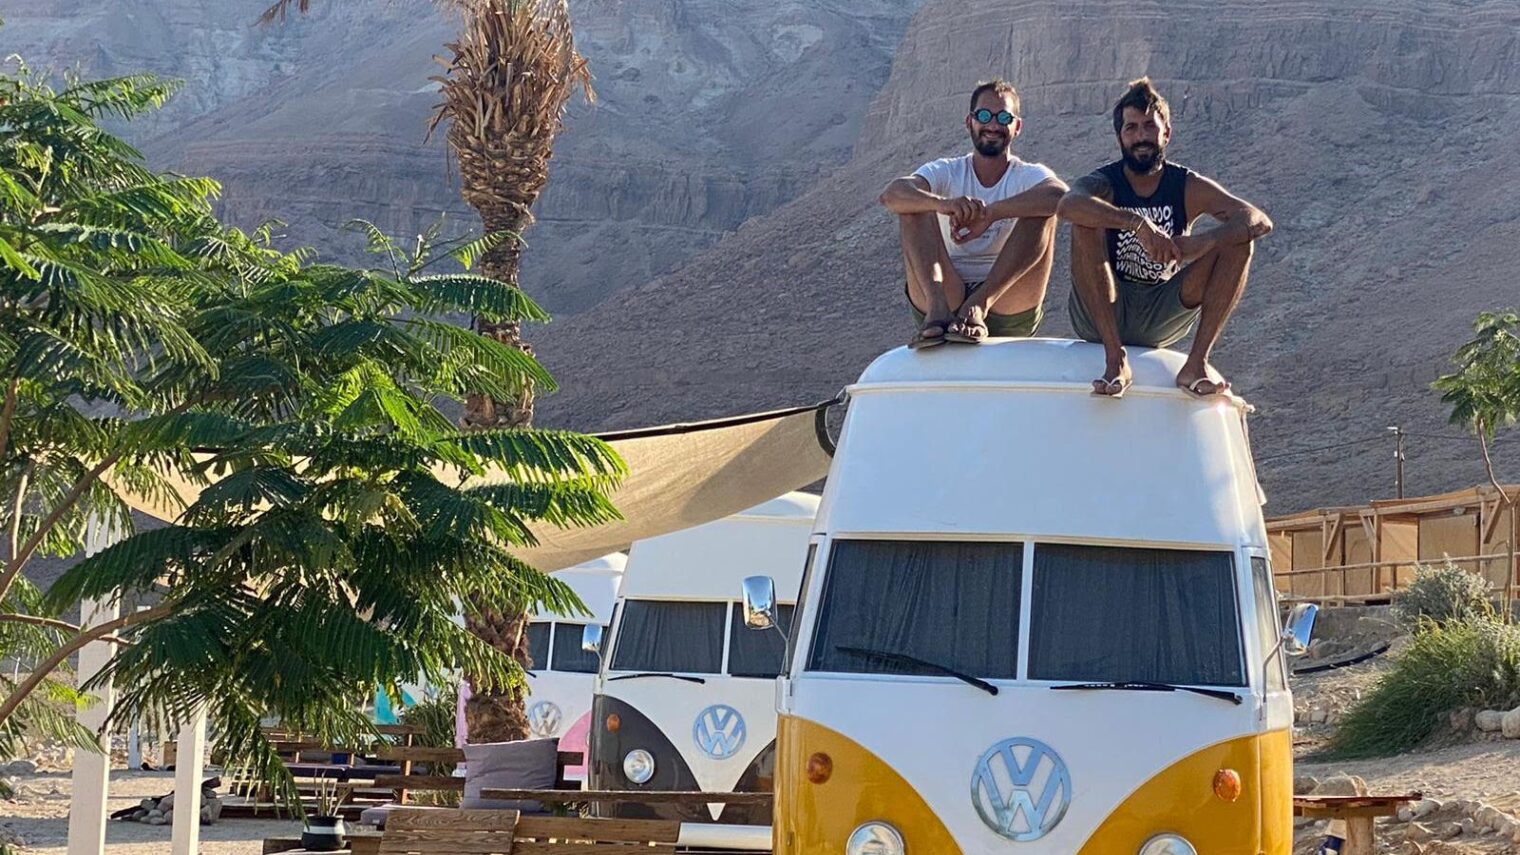 Business partners Ben Shukrun, left, and Avi Barkai with their camper vans. Photo courtesy of Ein Gedi Camp Lodge